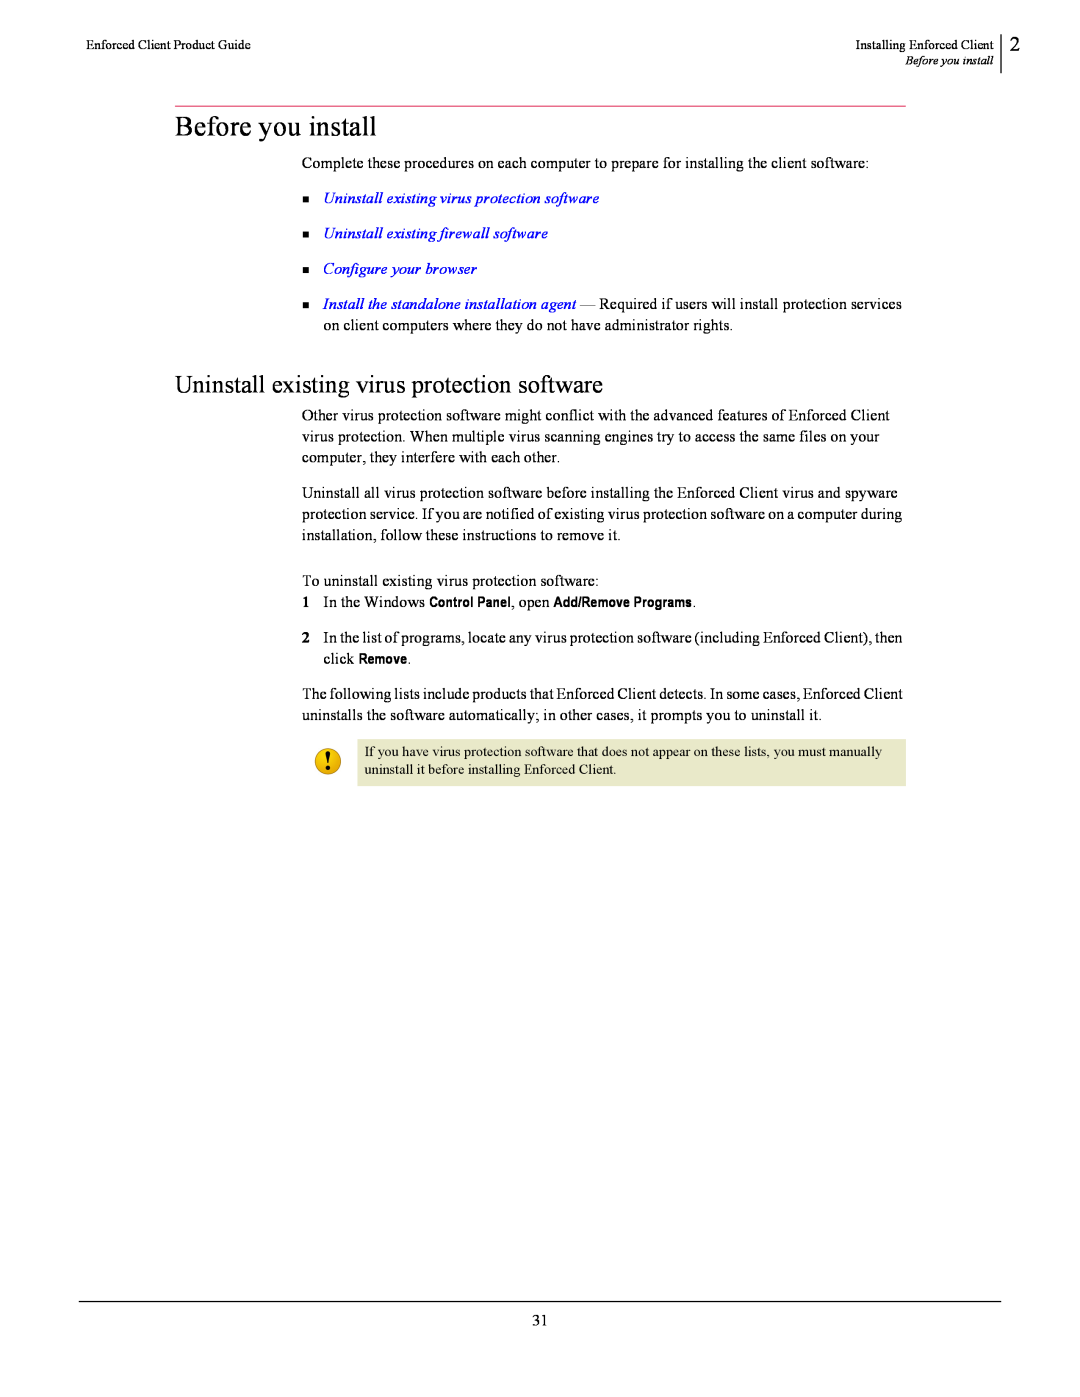 SonicWALL 4.5 manual Before you install, Uninstall existing virus protection software 